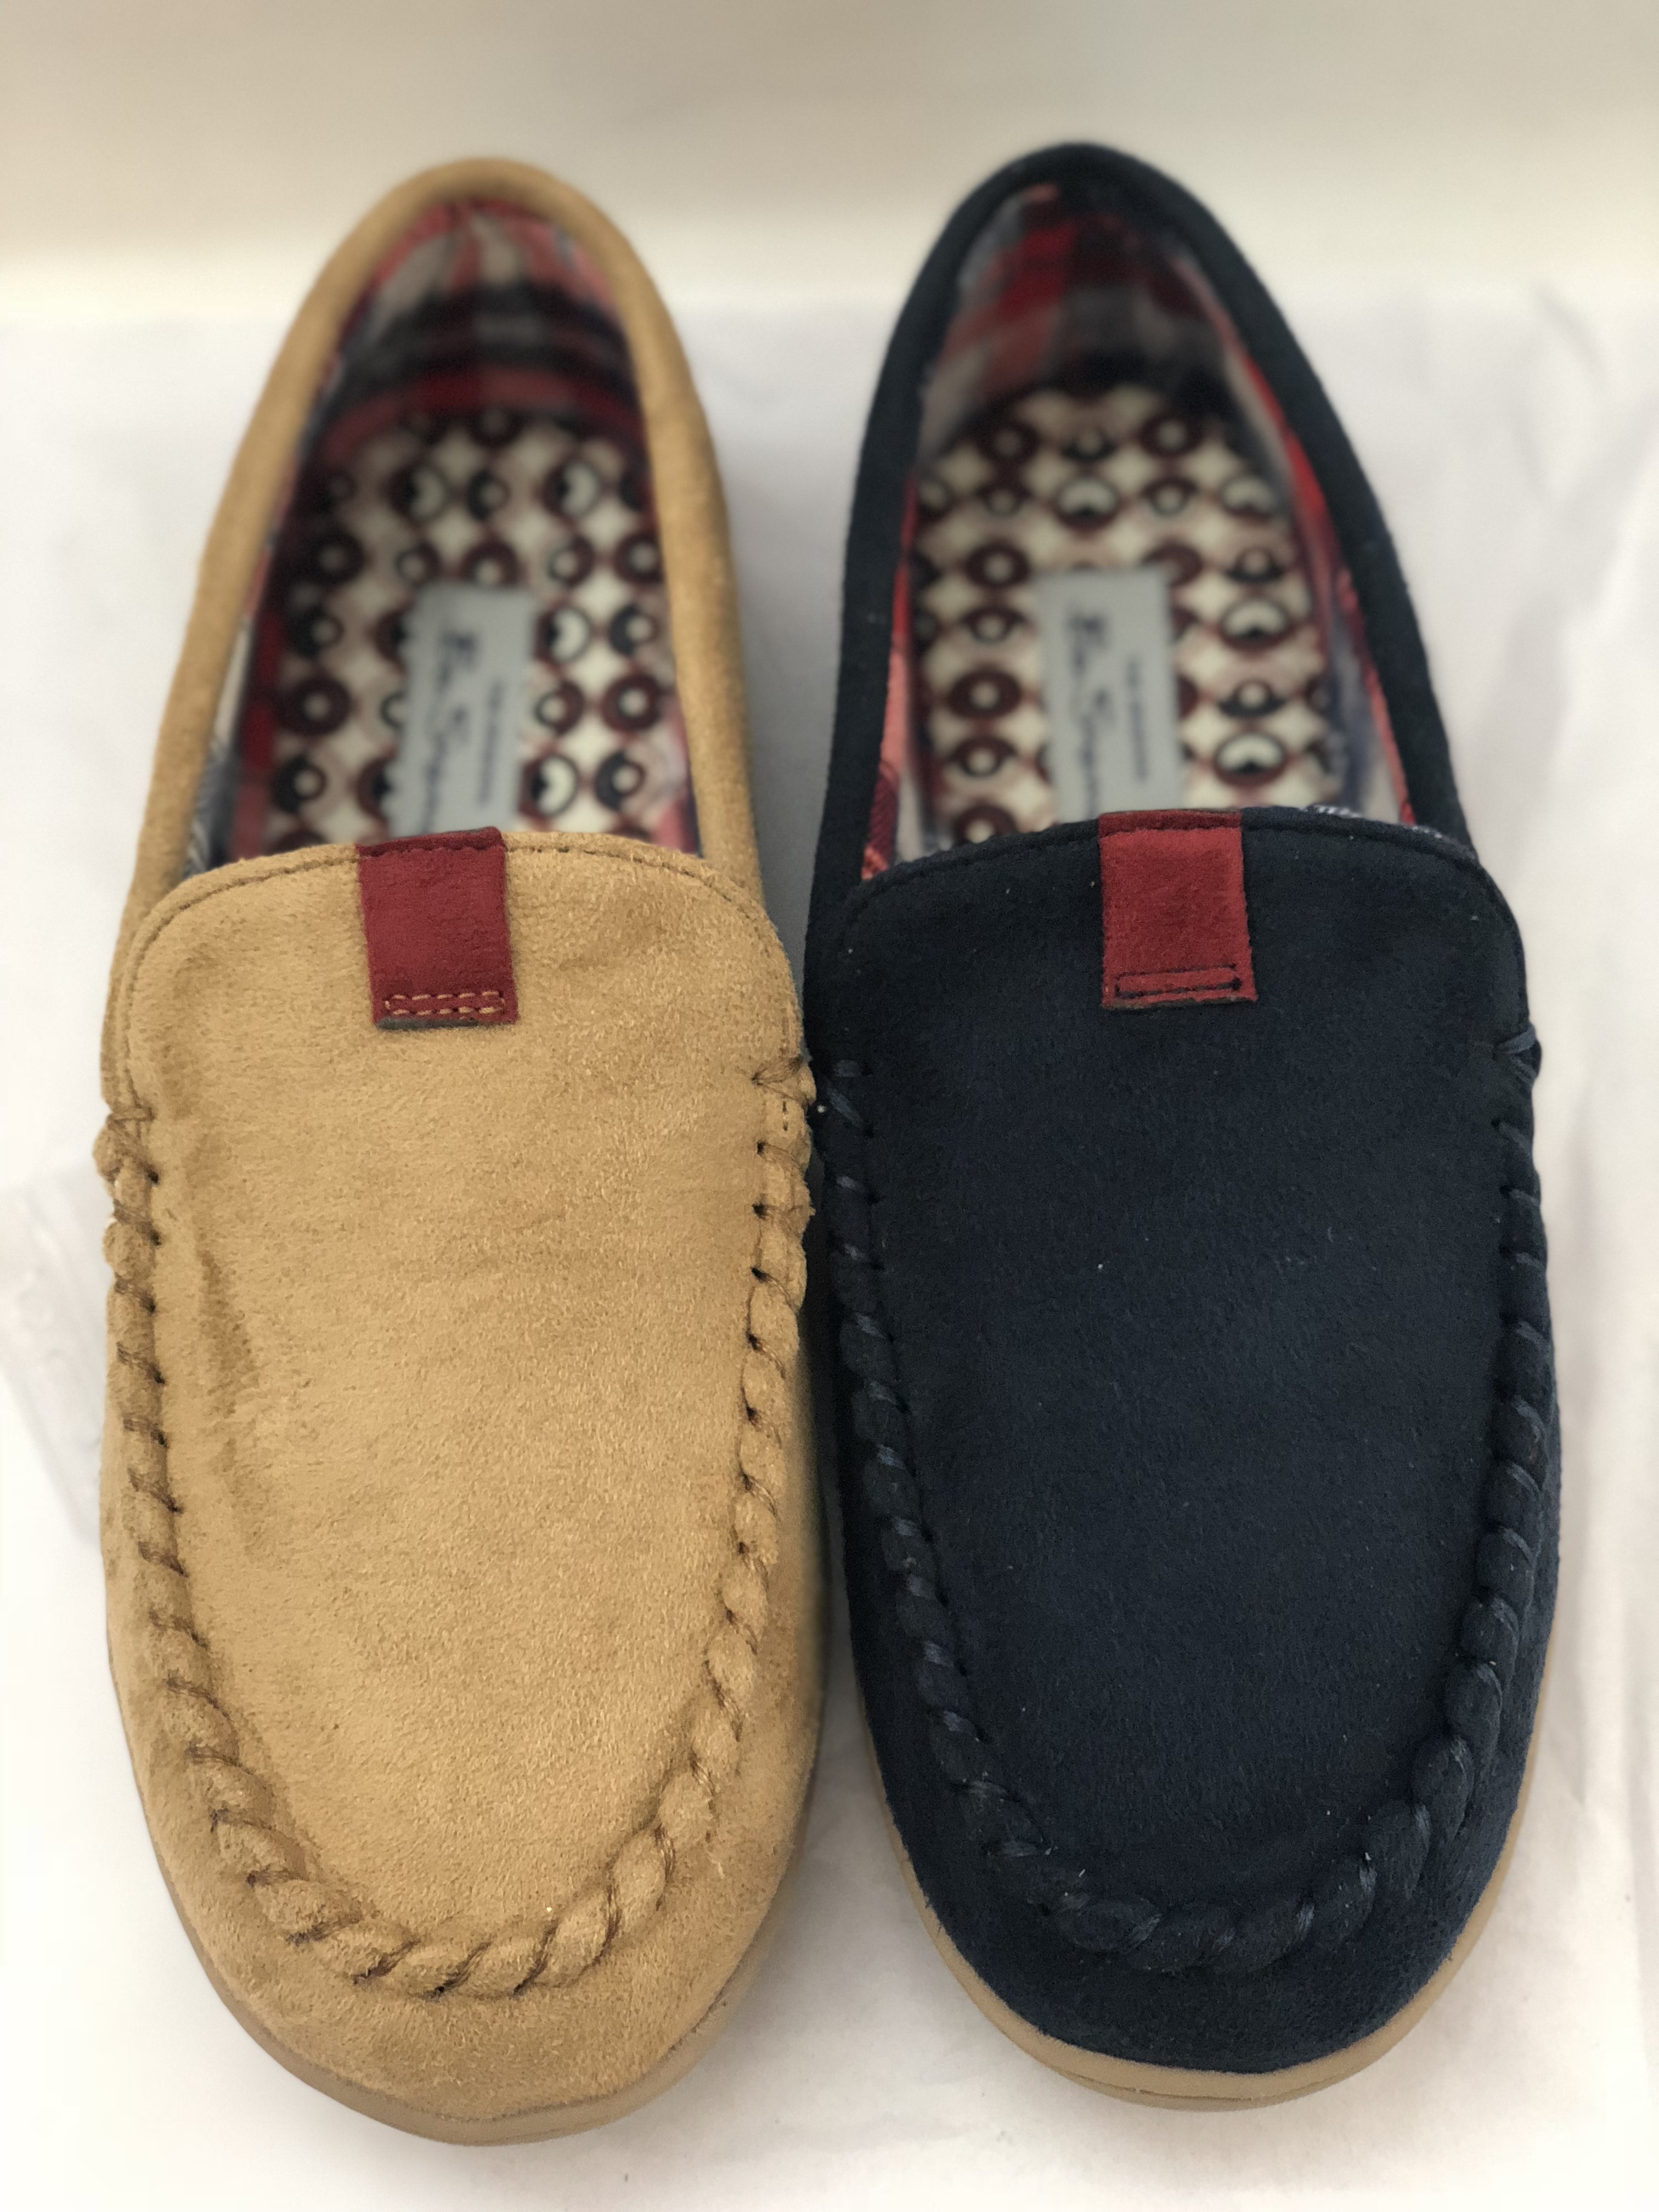 New Mens Microsuede slipper moccasin indoor slipper Featured Image